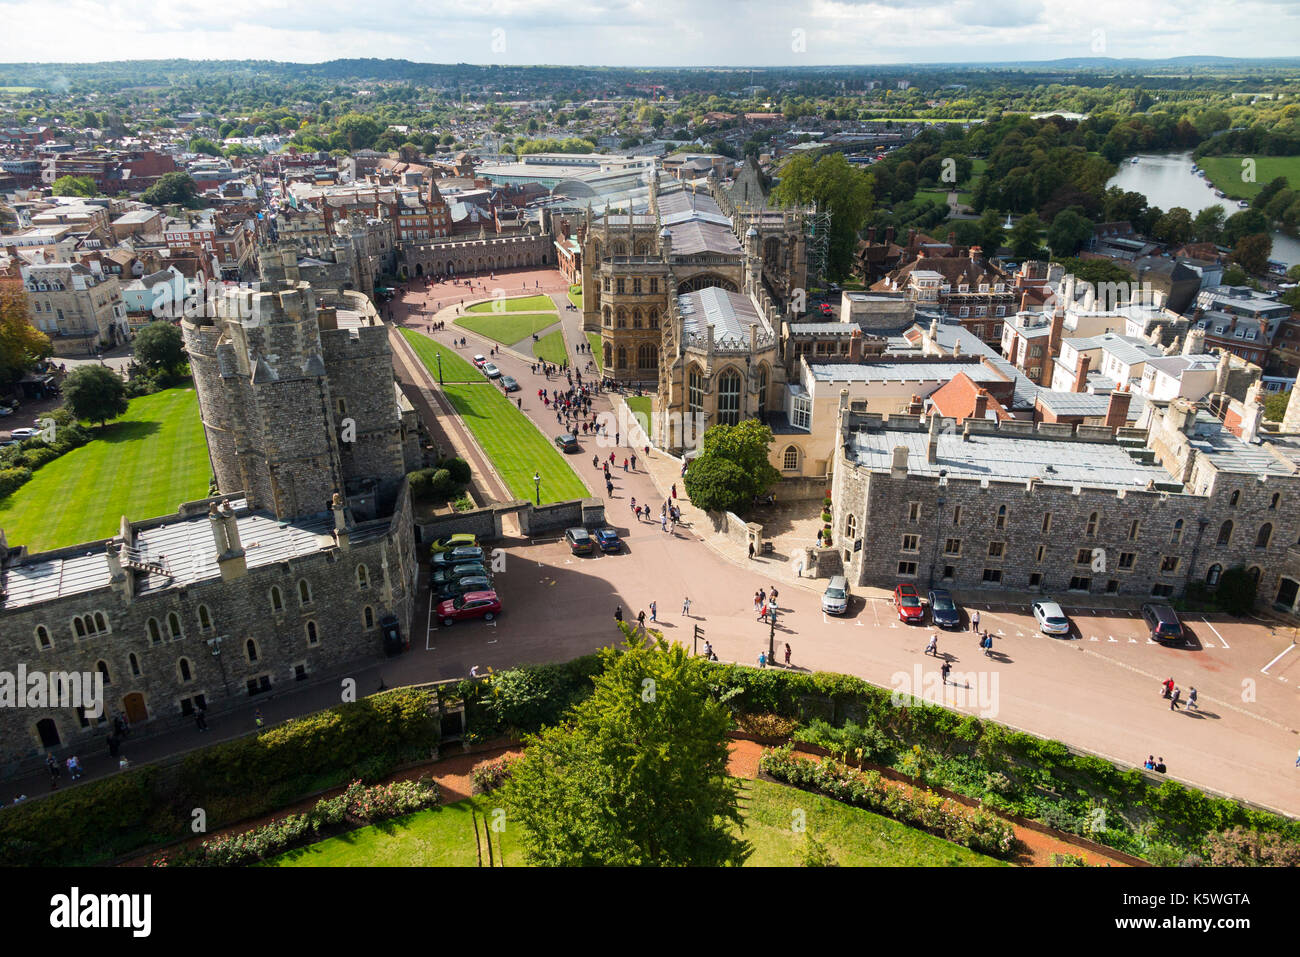 View of the Lower Ward of Windsor Castle including Saint Georges Chapel including its defensive walls & towers, and accommodation. Windsor, UK. (90) Stock Photo